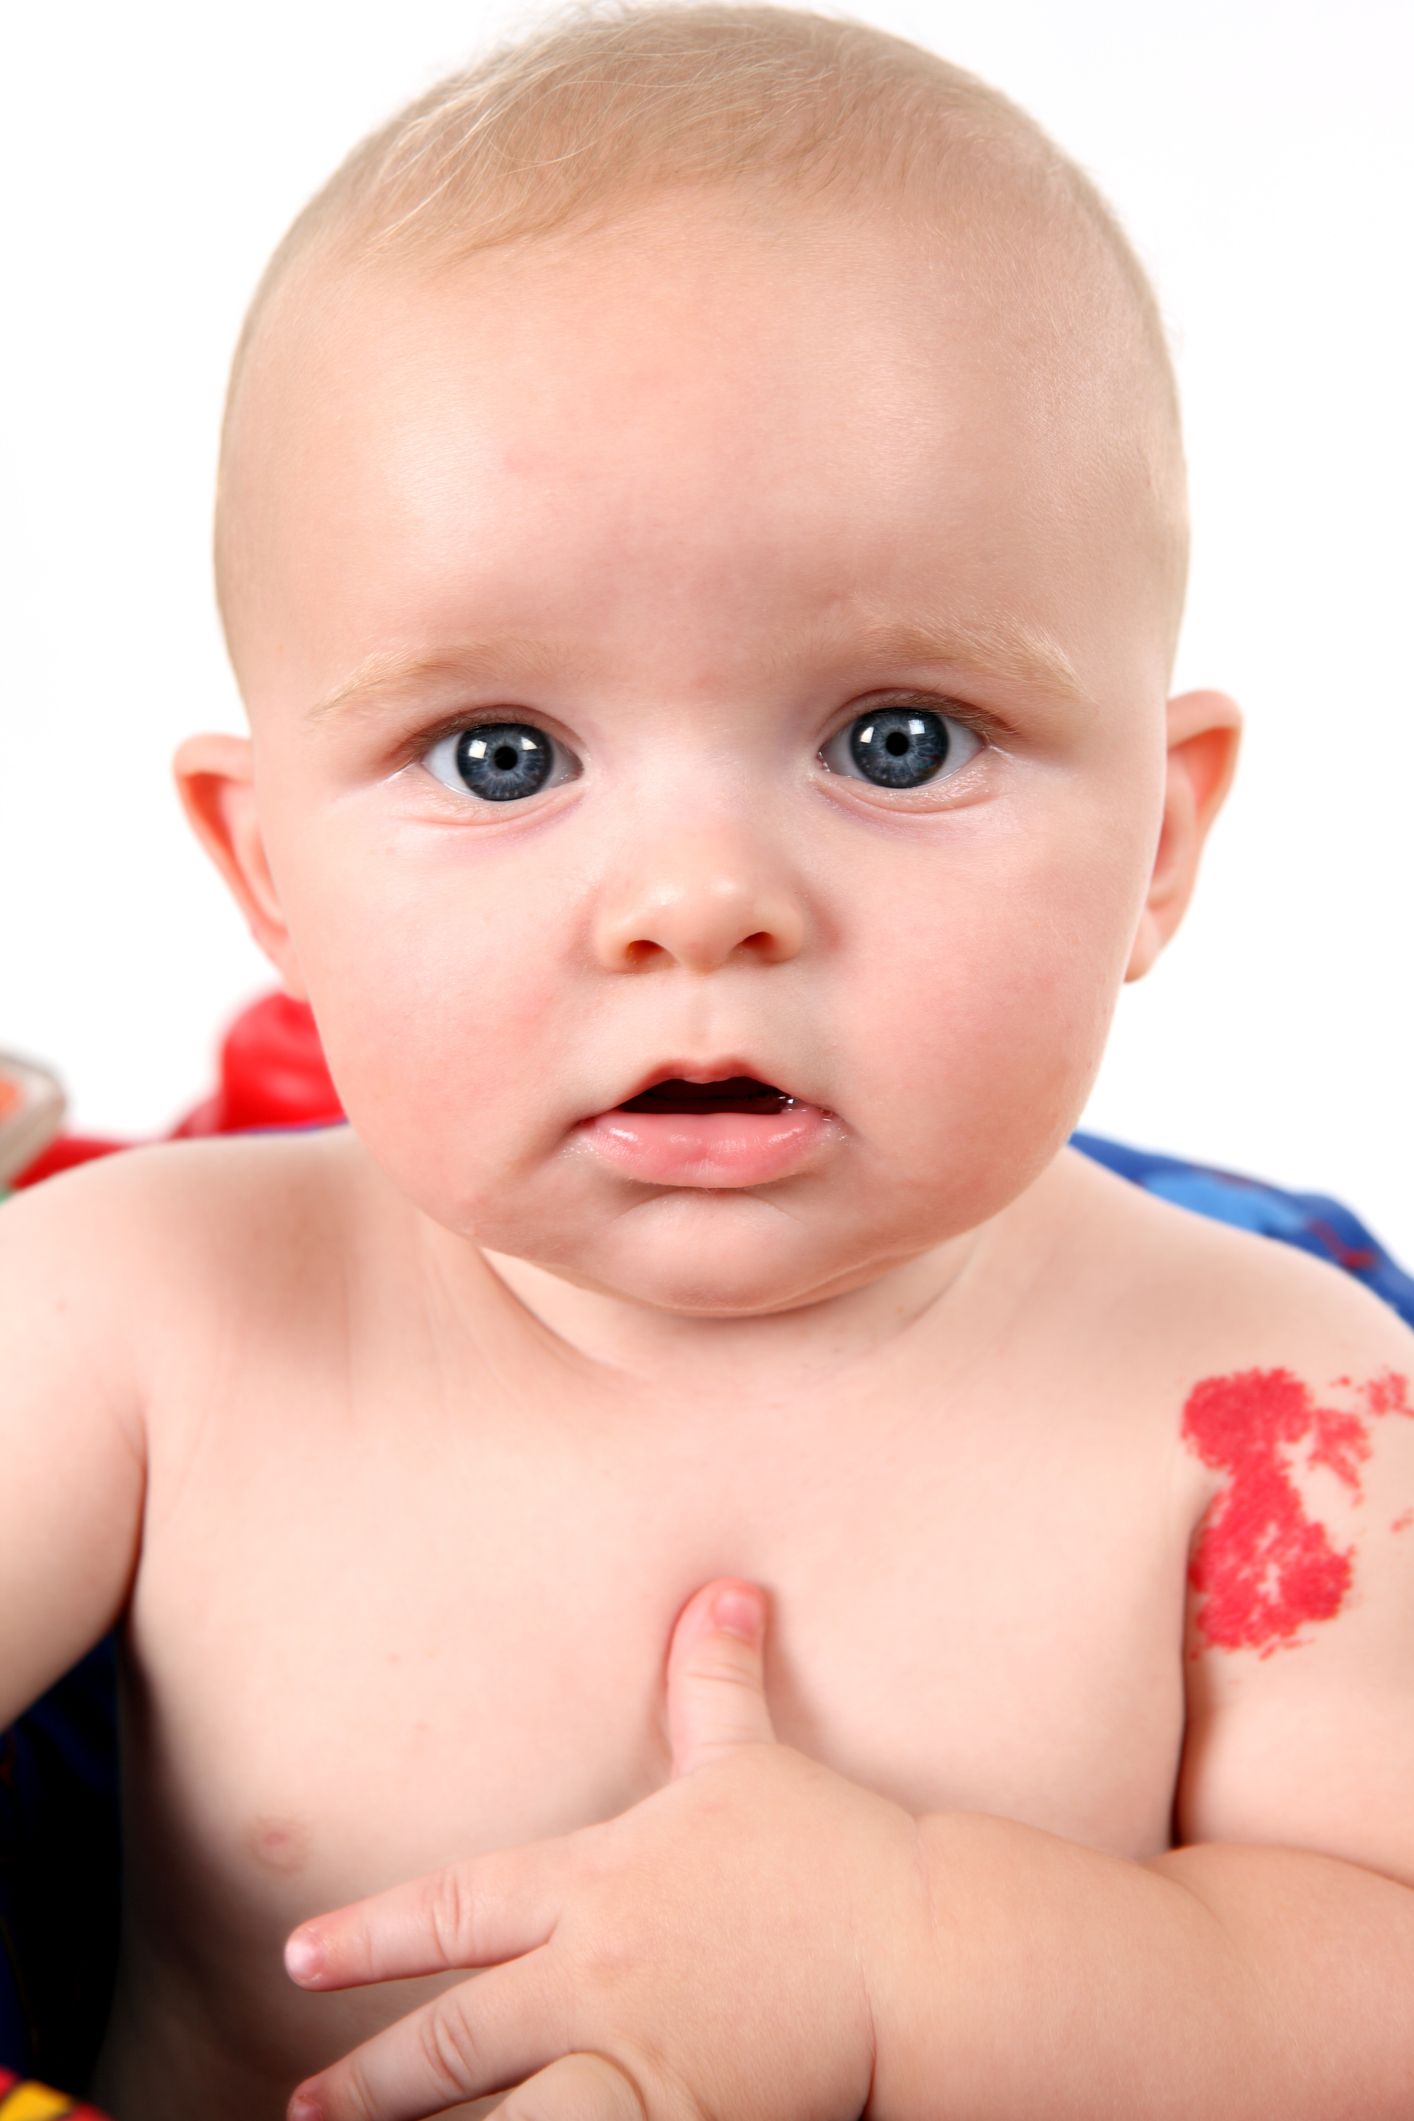 Birthmarks: causes, types, and treatment and when to be concerned